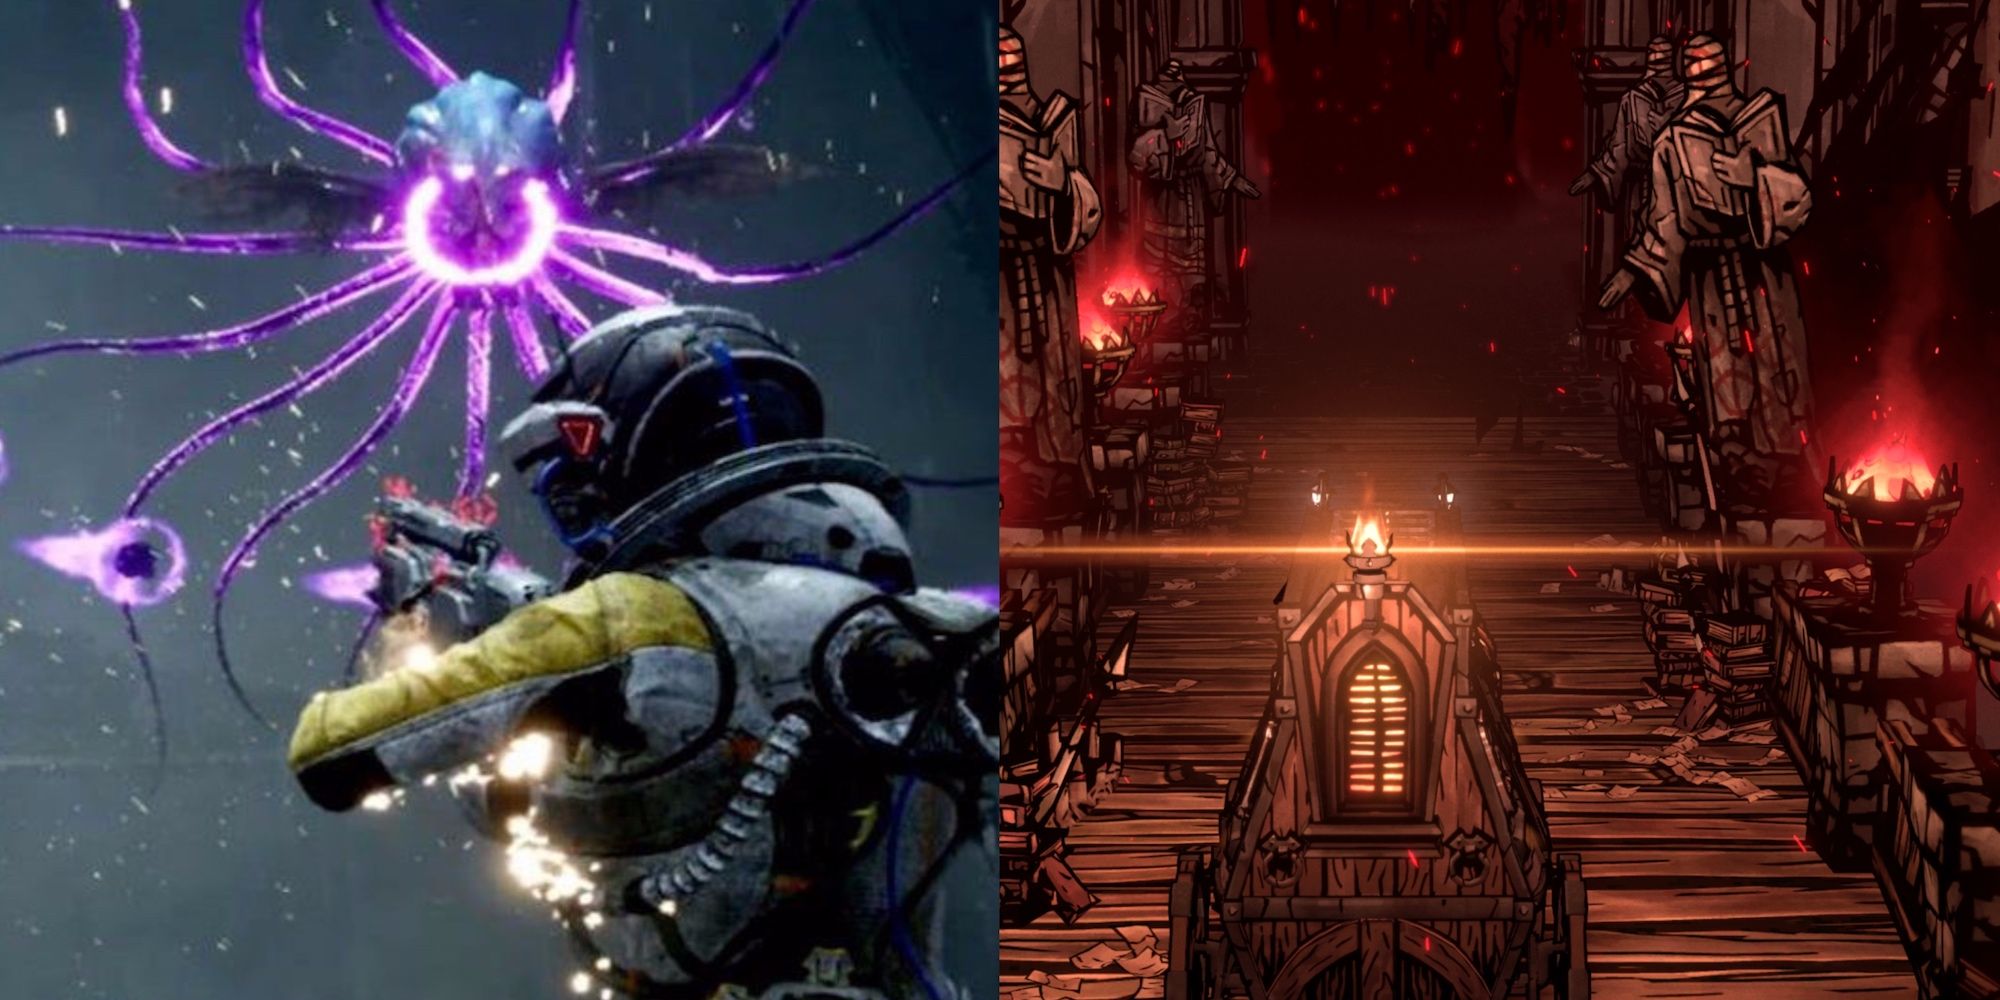 Returnal on the left, Darkest Dungeon on the right